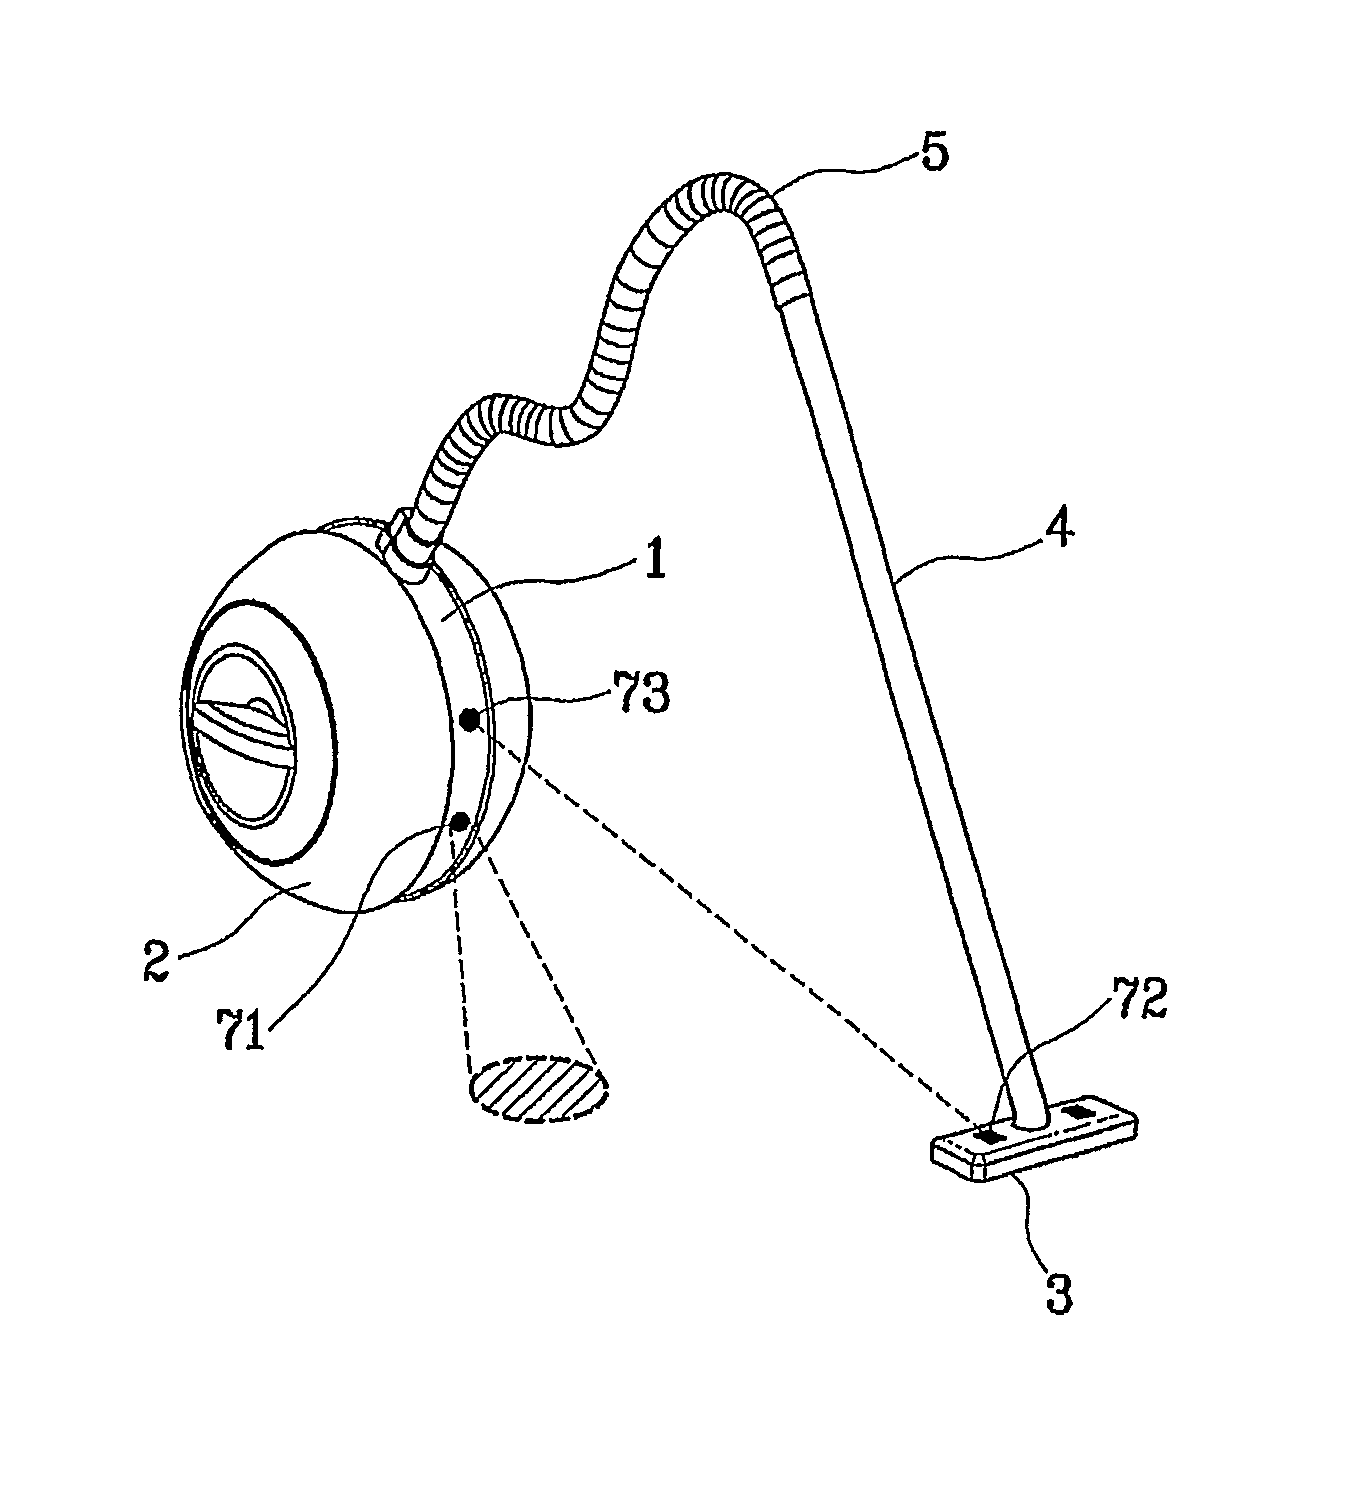 Vacuum cleaner having abilities for automatic moving and posture control and method of controlling the same